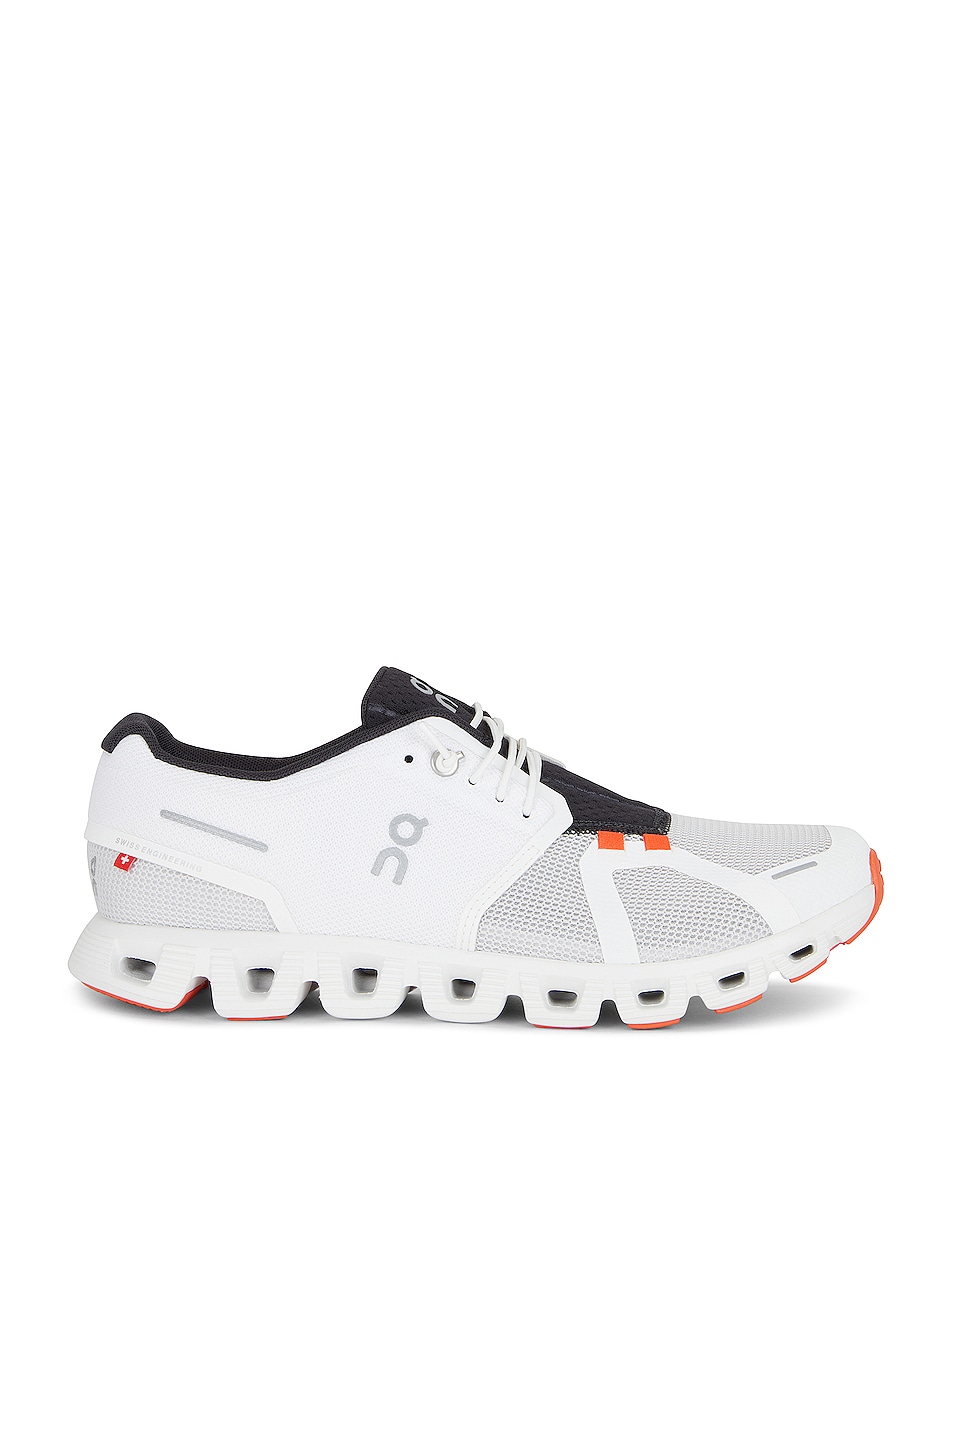 Image 1 of On Cloud 5 Push in White & Flame